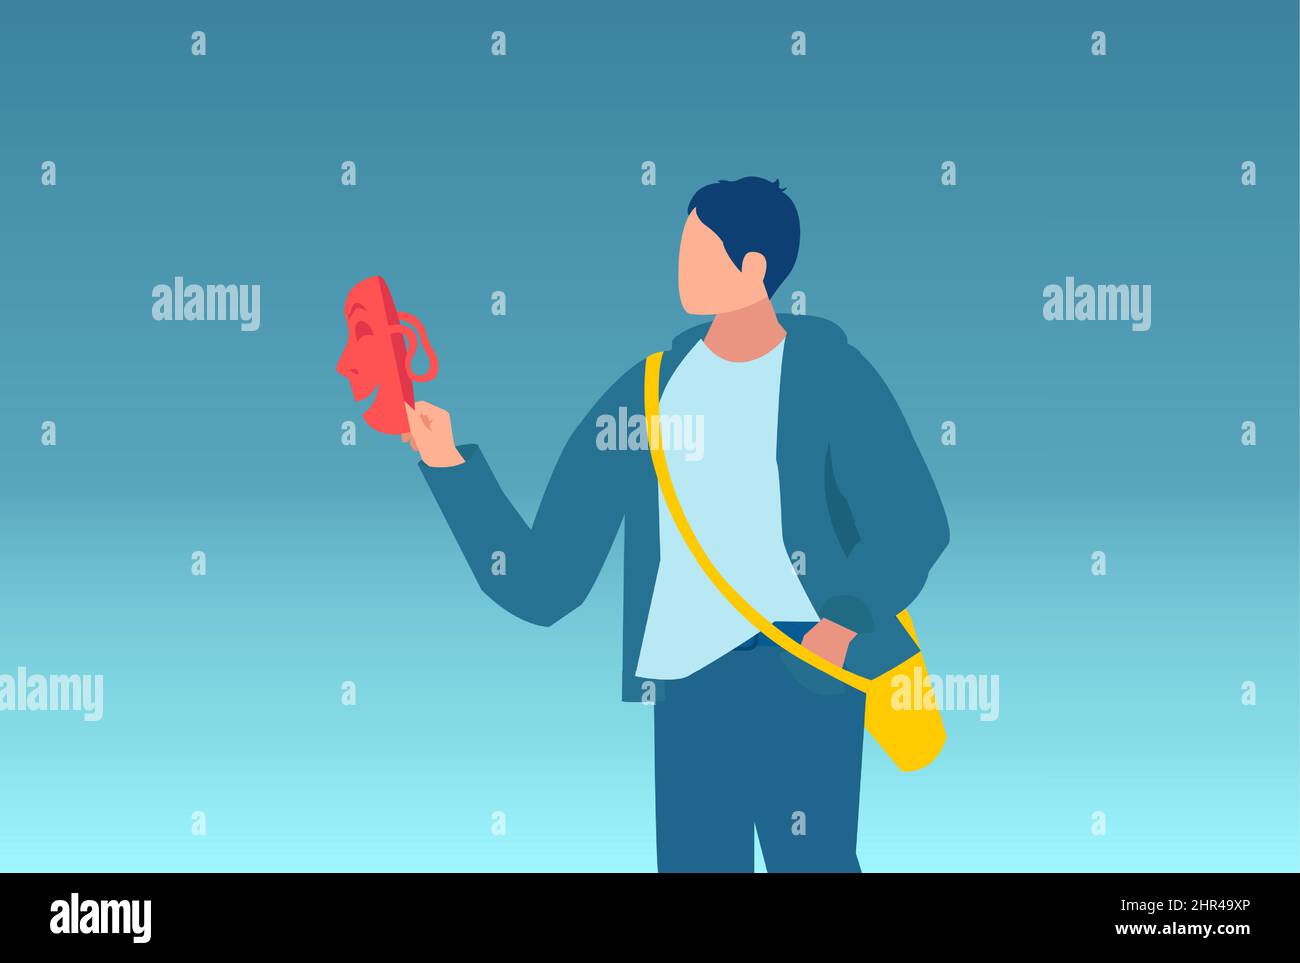 Vector of a young man a teenager holding smiling mask thinking about being or acting like another person. Stock Vector